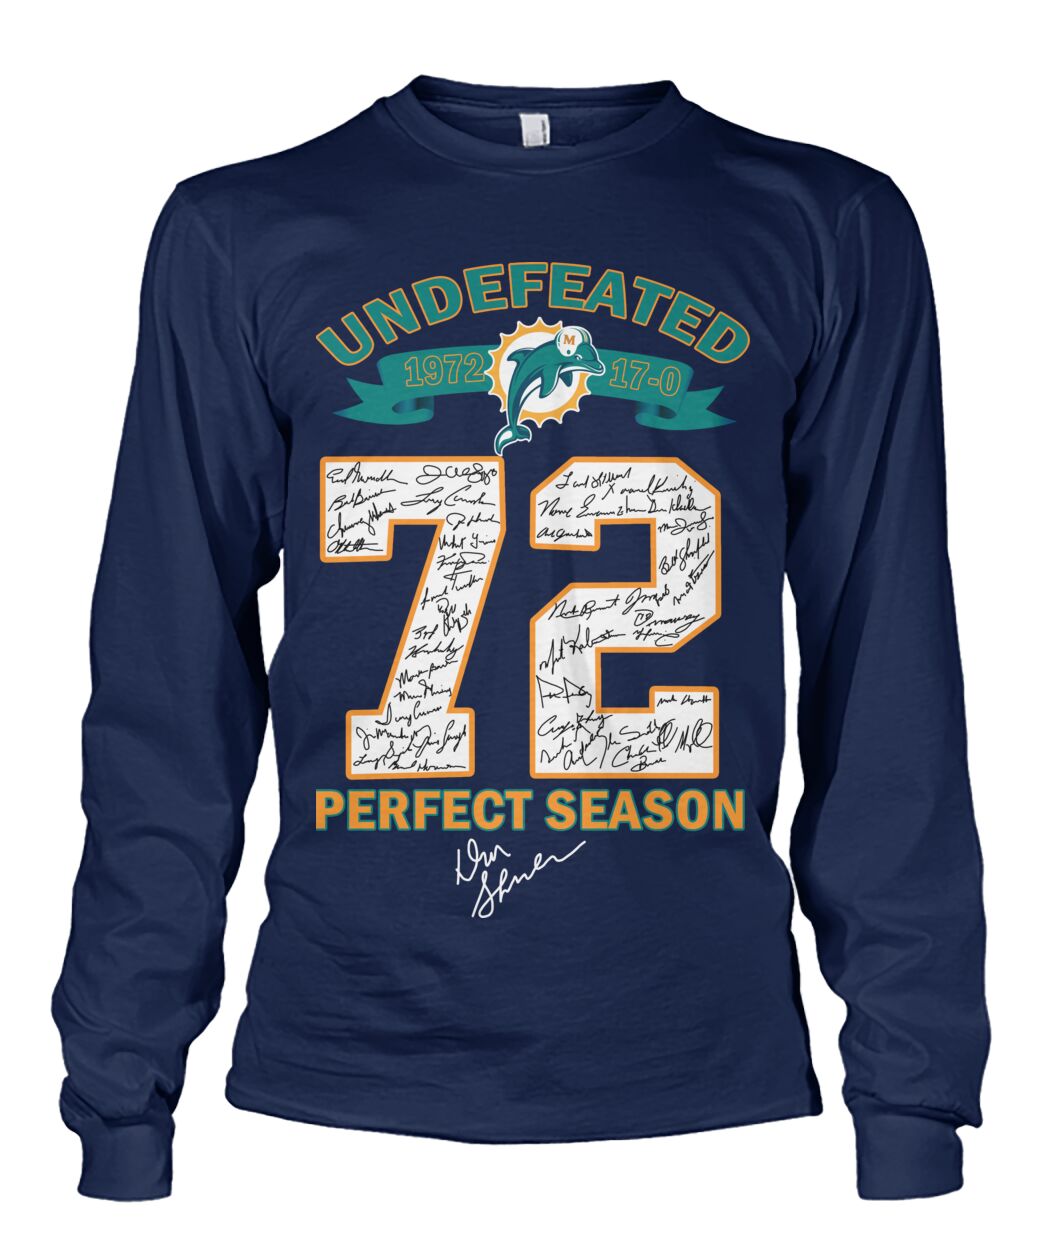 Miami Dolphins Undefeated 72 perfect season shirt 11